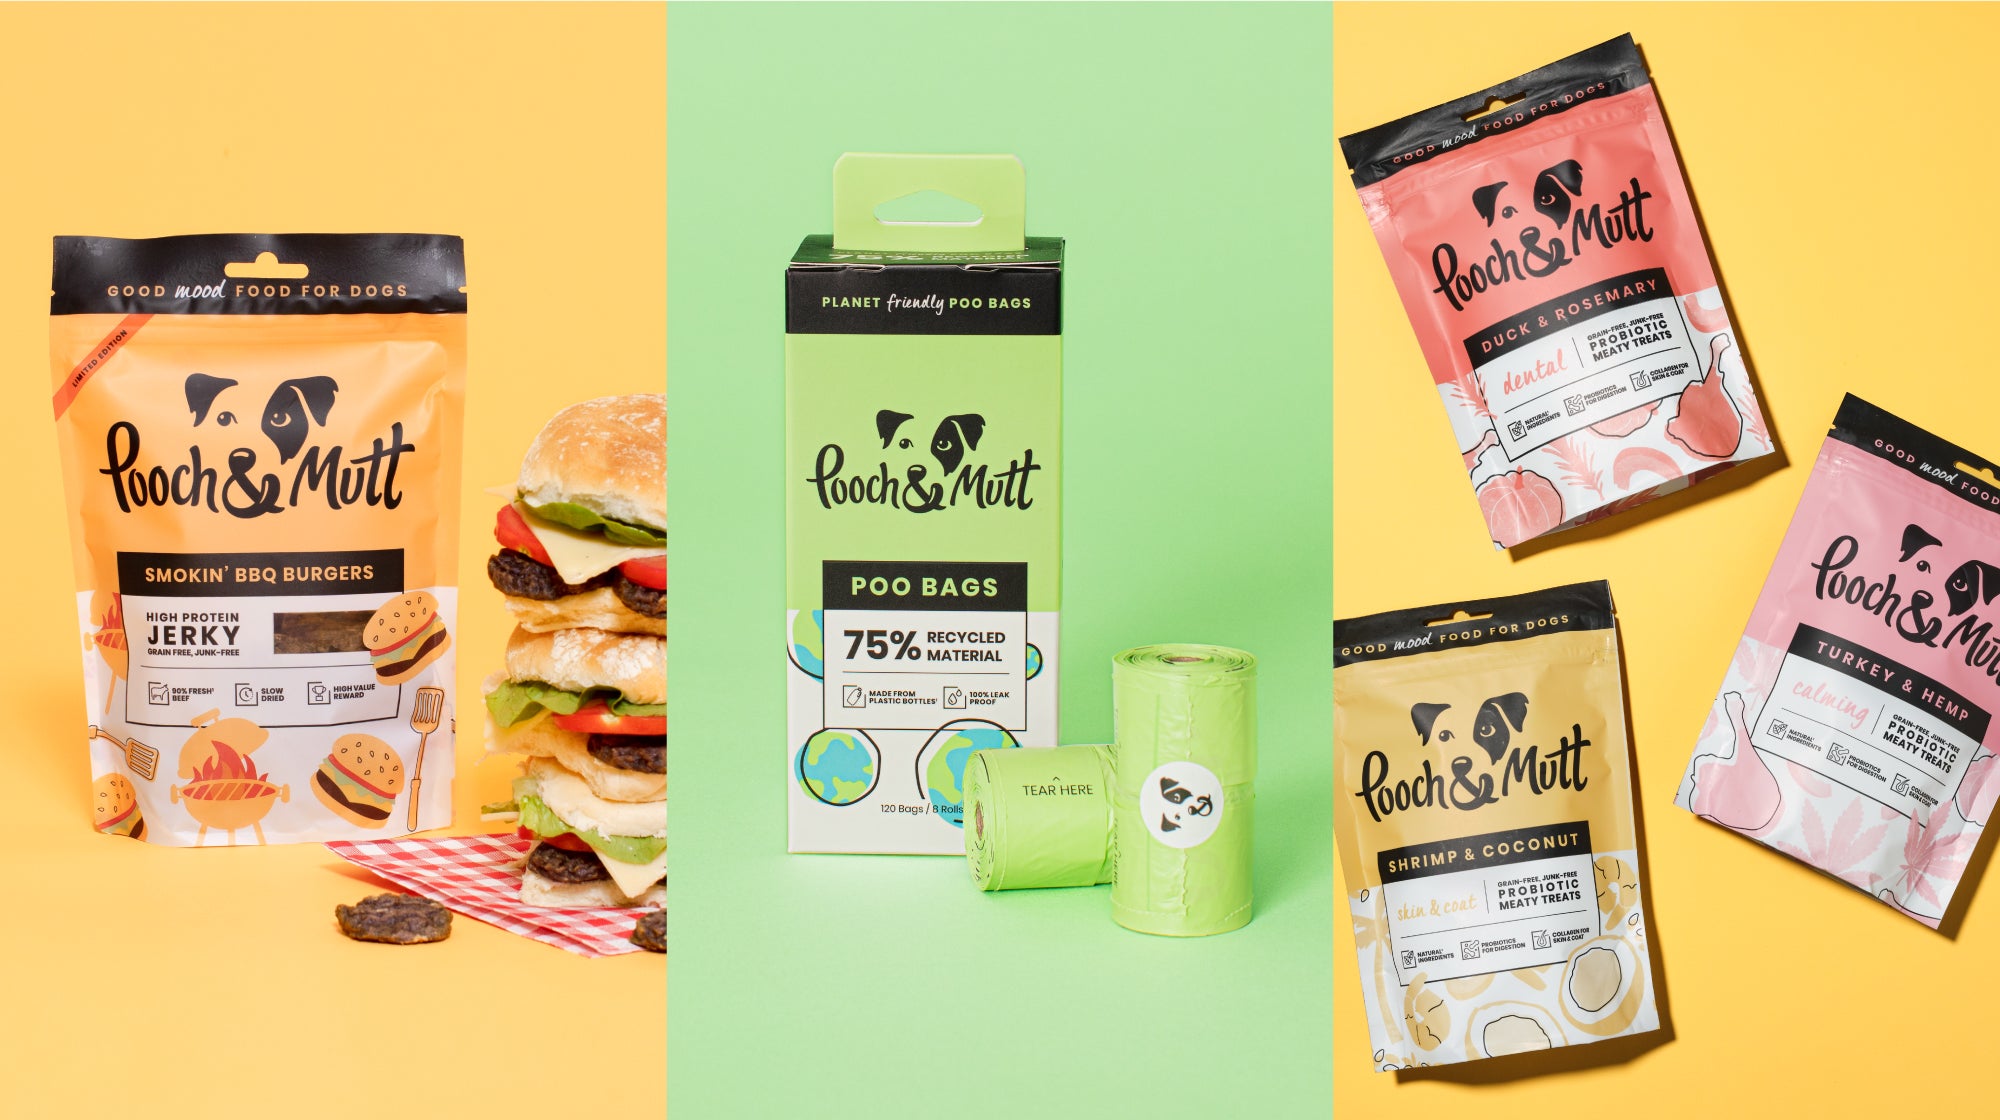 Pooch & Mutt products across three columns, including Smokin' BBQ Burgers, Planet Friendly Poo bags and Prebiotic Meaty Treat packs